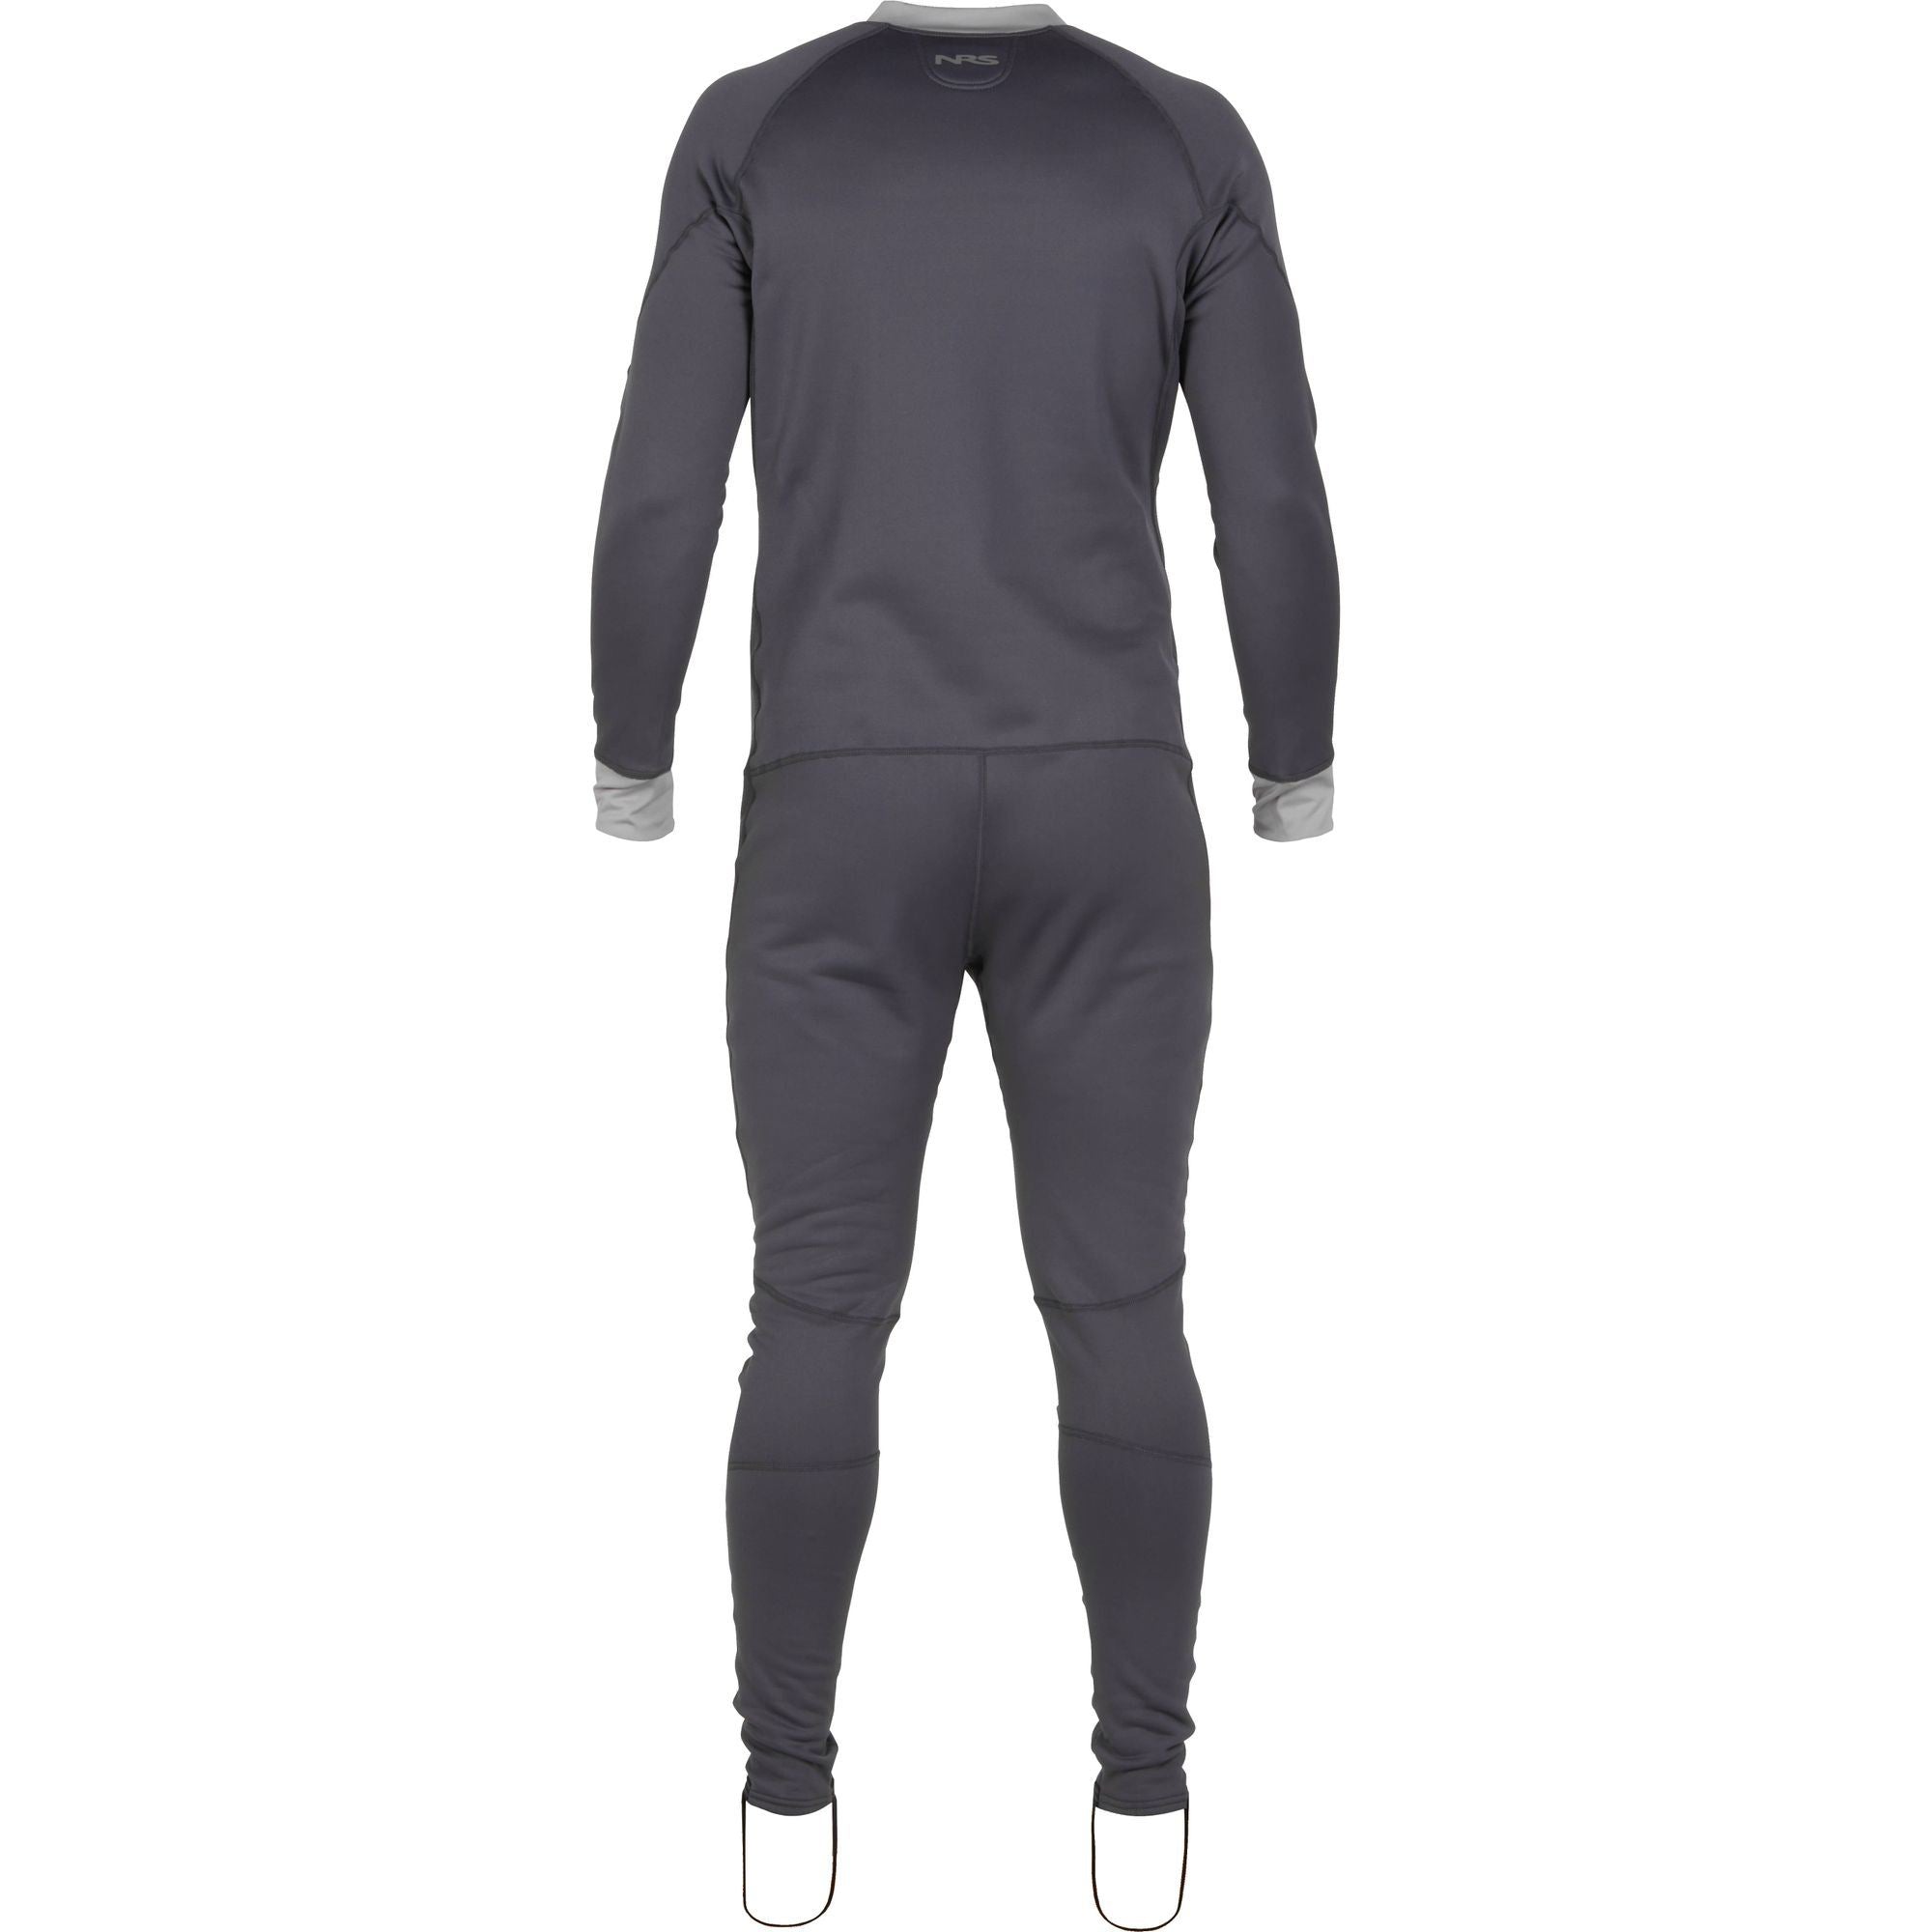 NRS Expedition Weight Union Suit, Herren